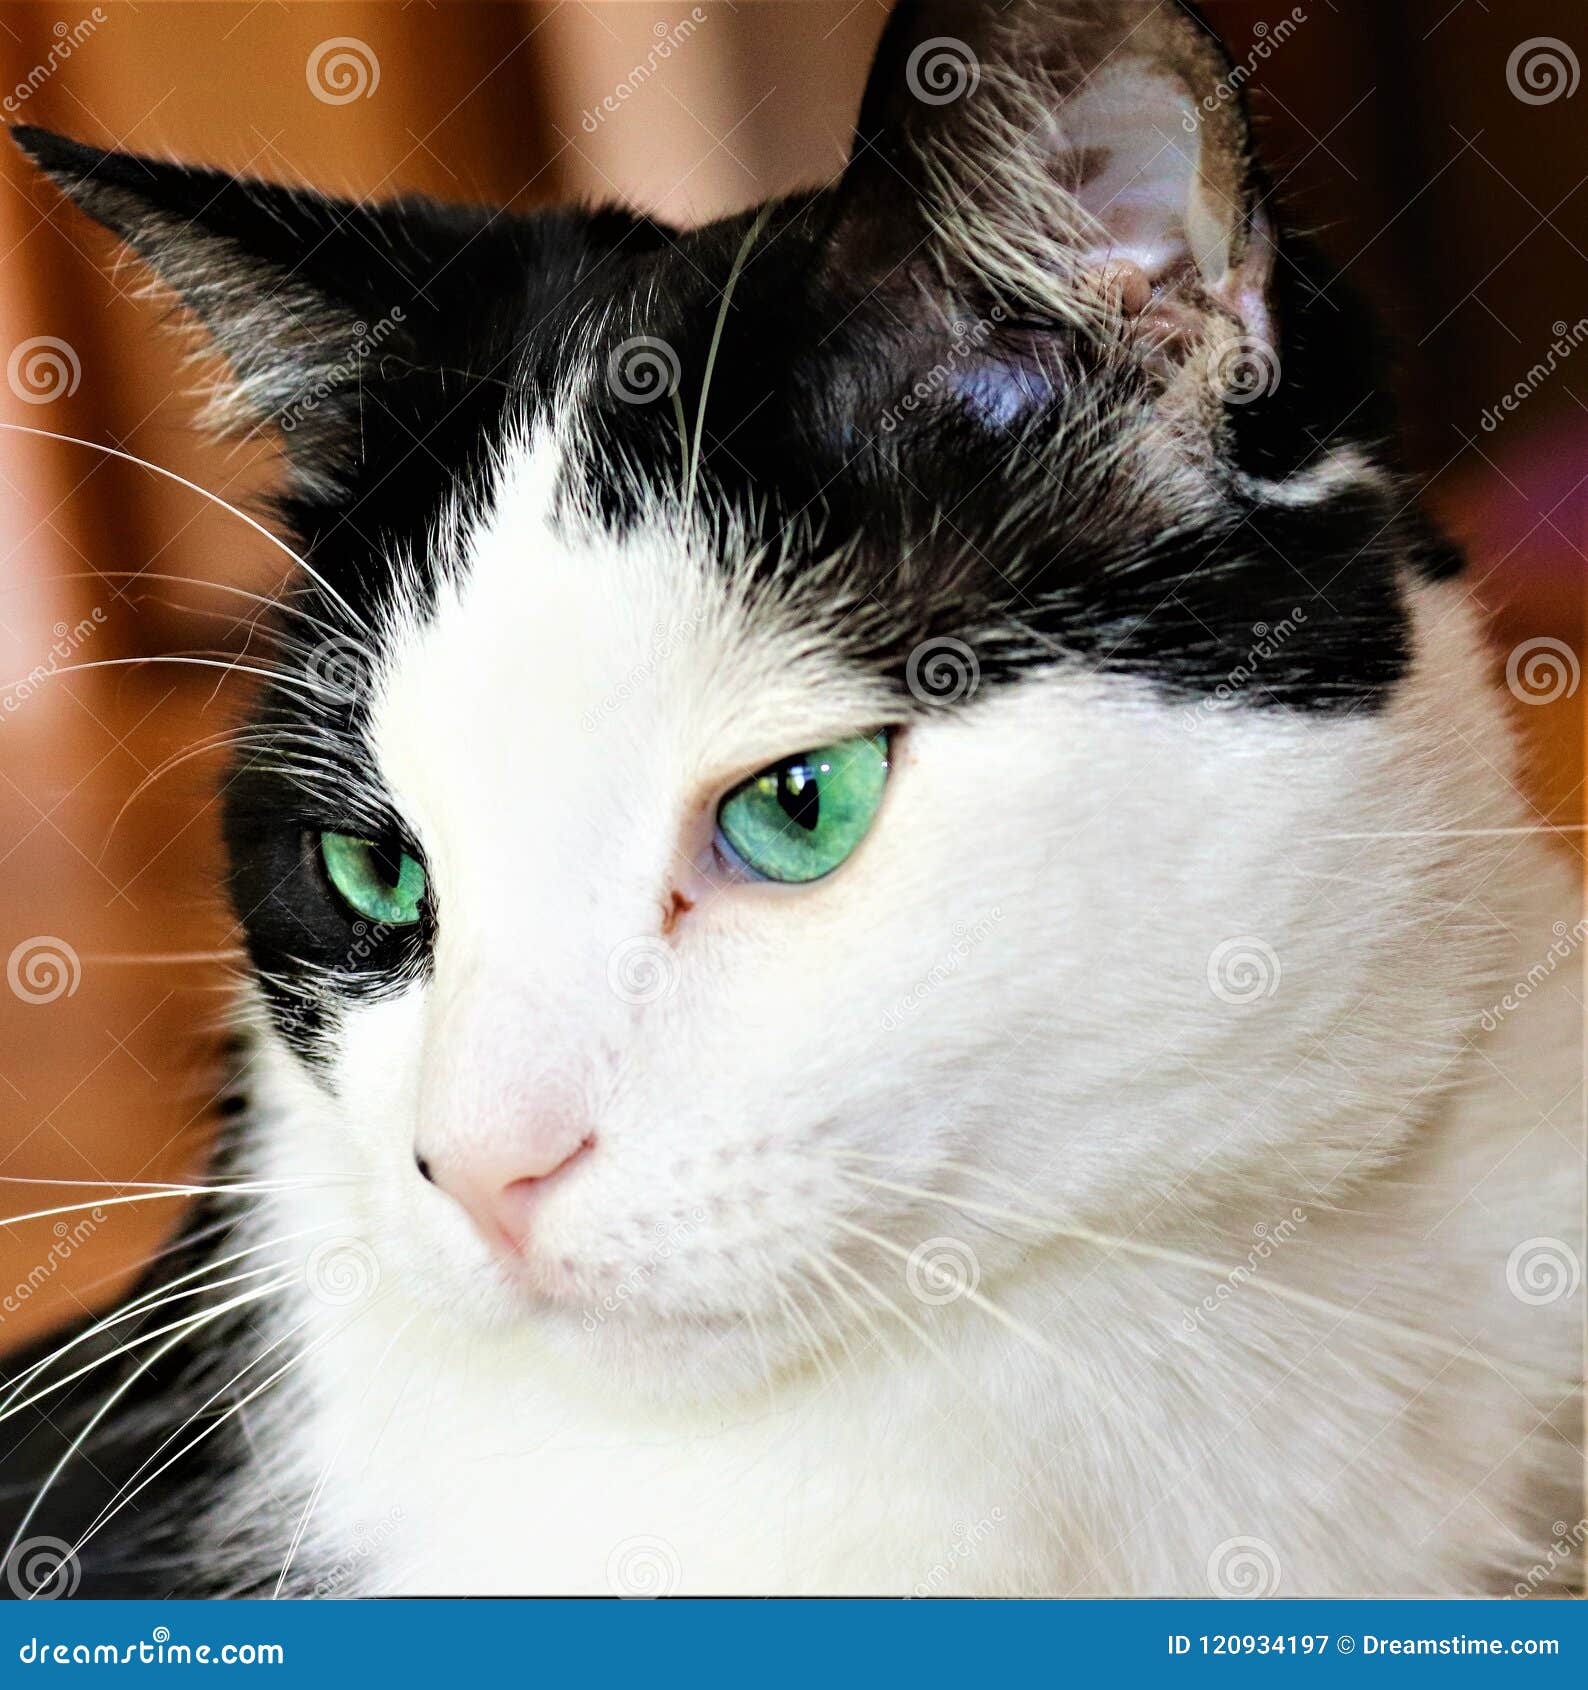 Beautiful Black And White Cat With Aqua Green Eyes Stock Image Image Of Arrived Beautiful 120934197